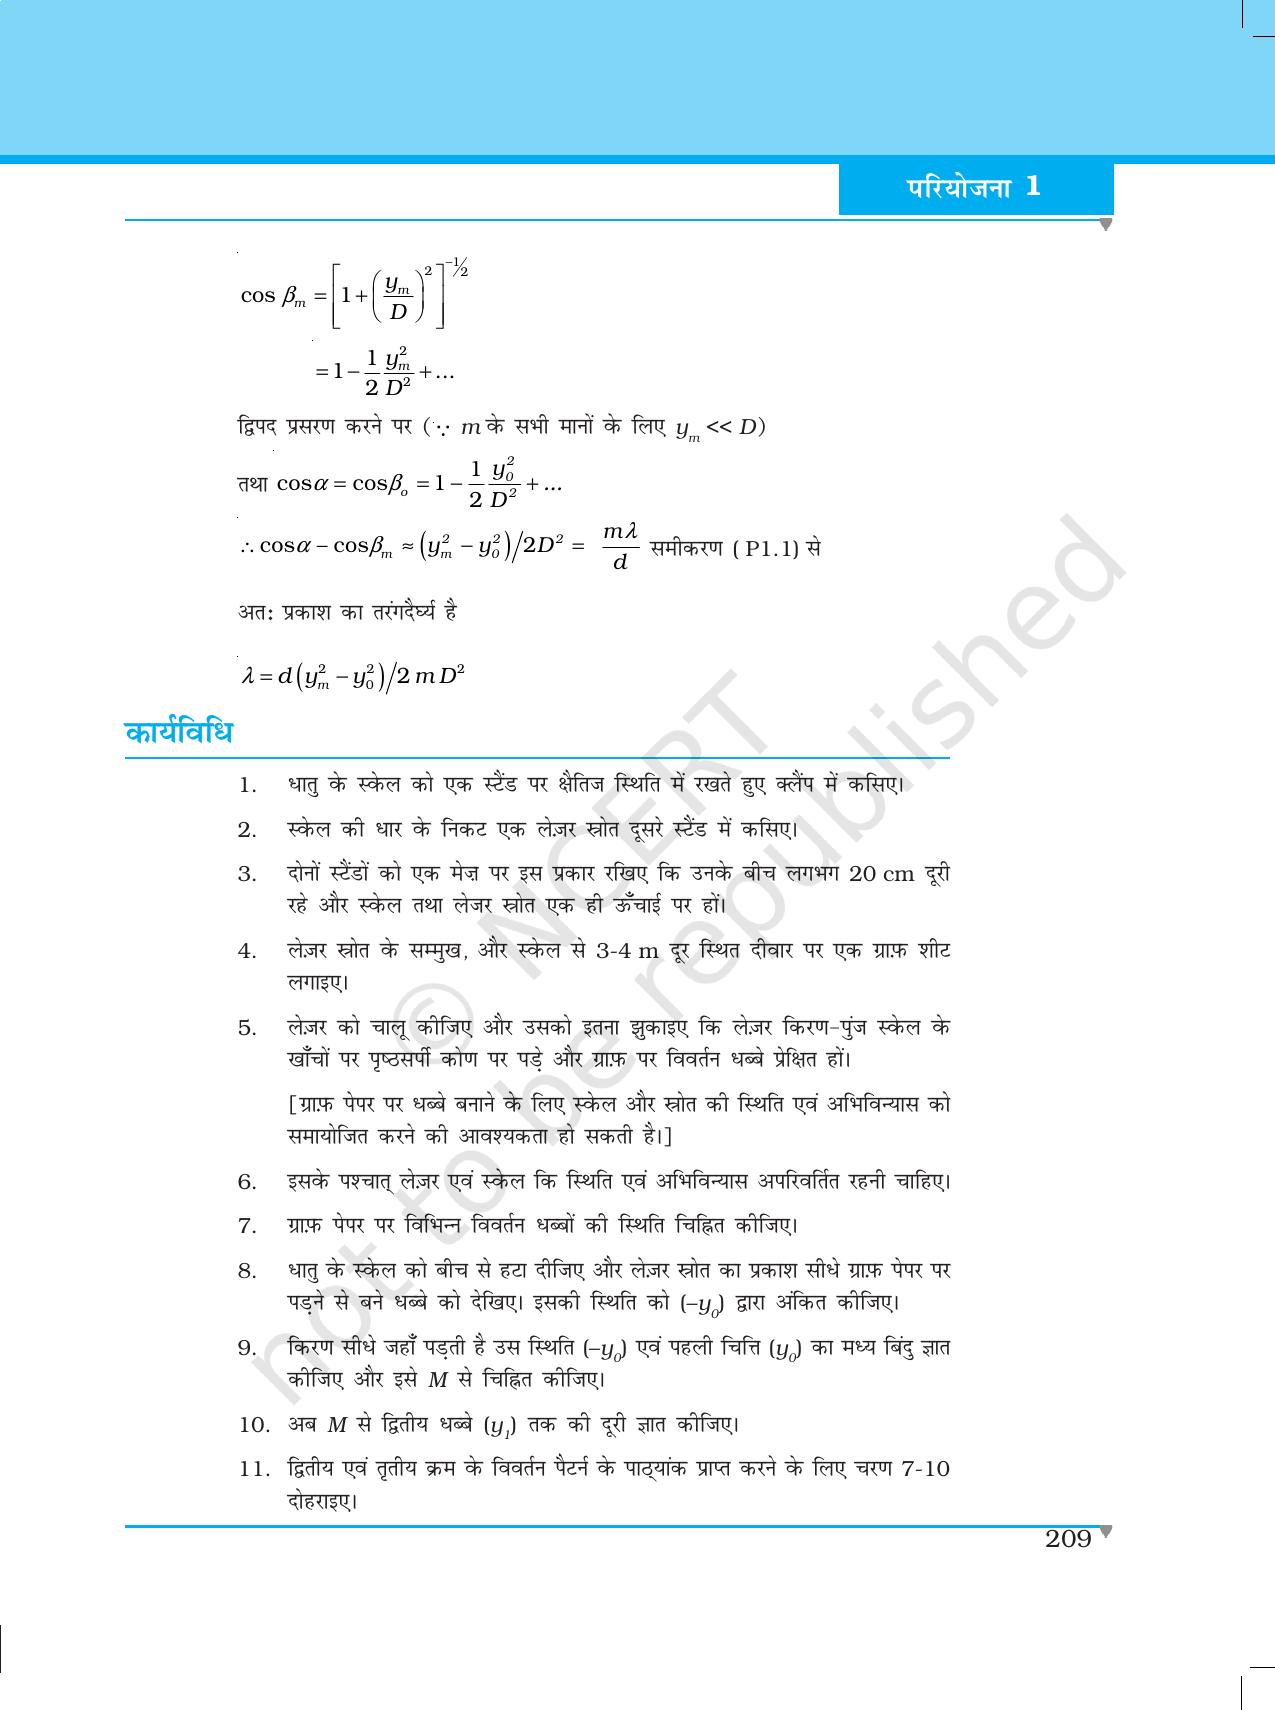 NCERT Laboratory Manuals for Class XII भौतिकी - परियोजना (1 - 7) - Page 3